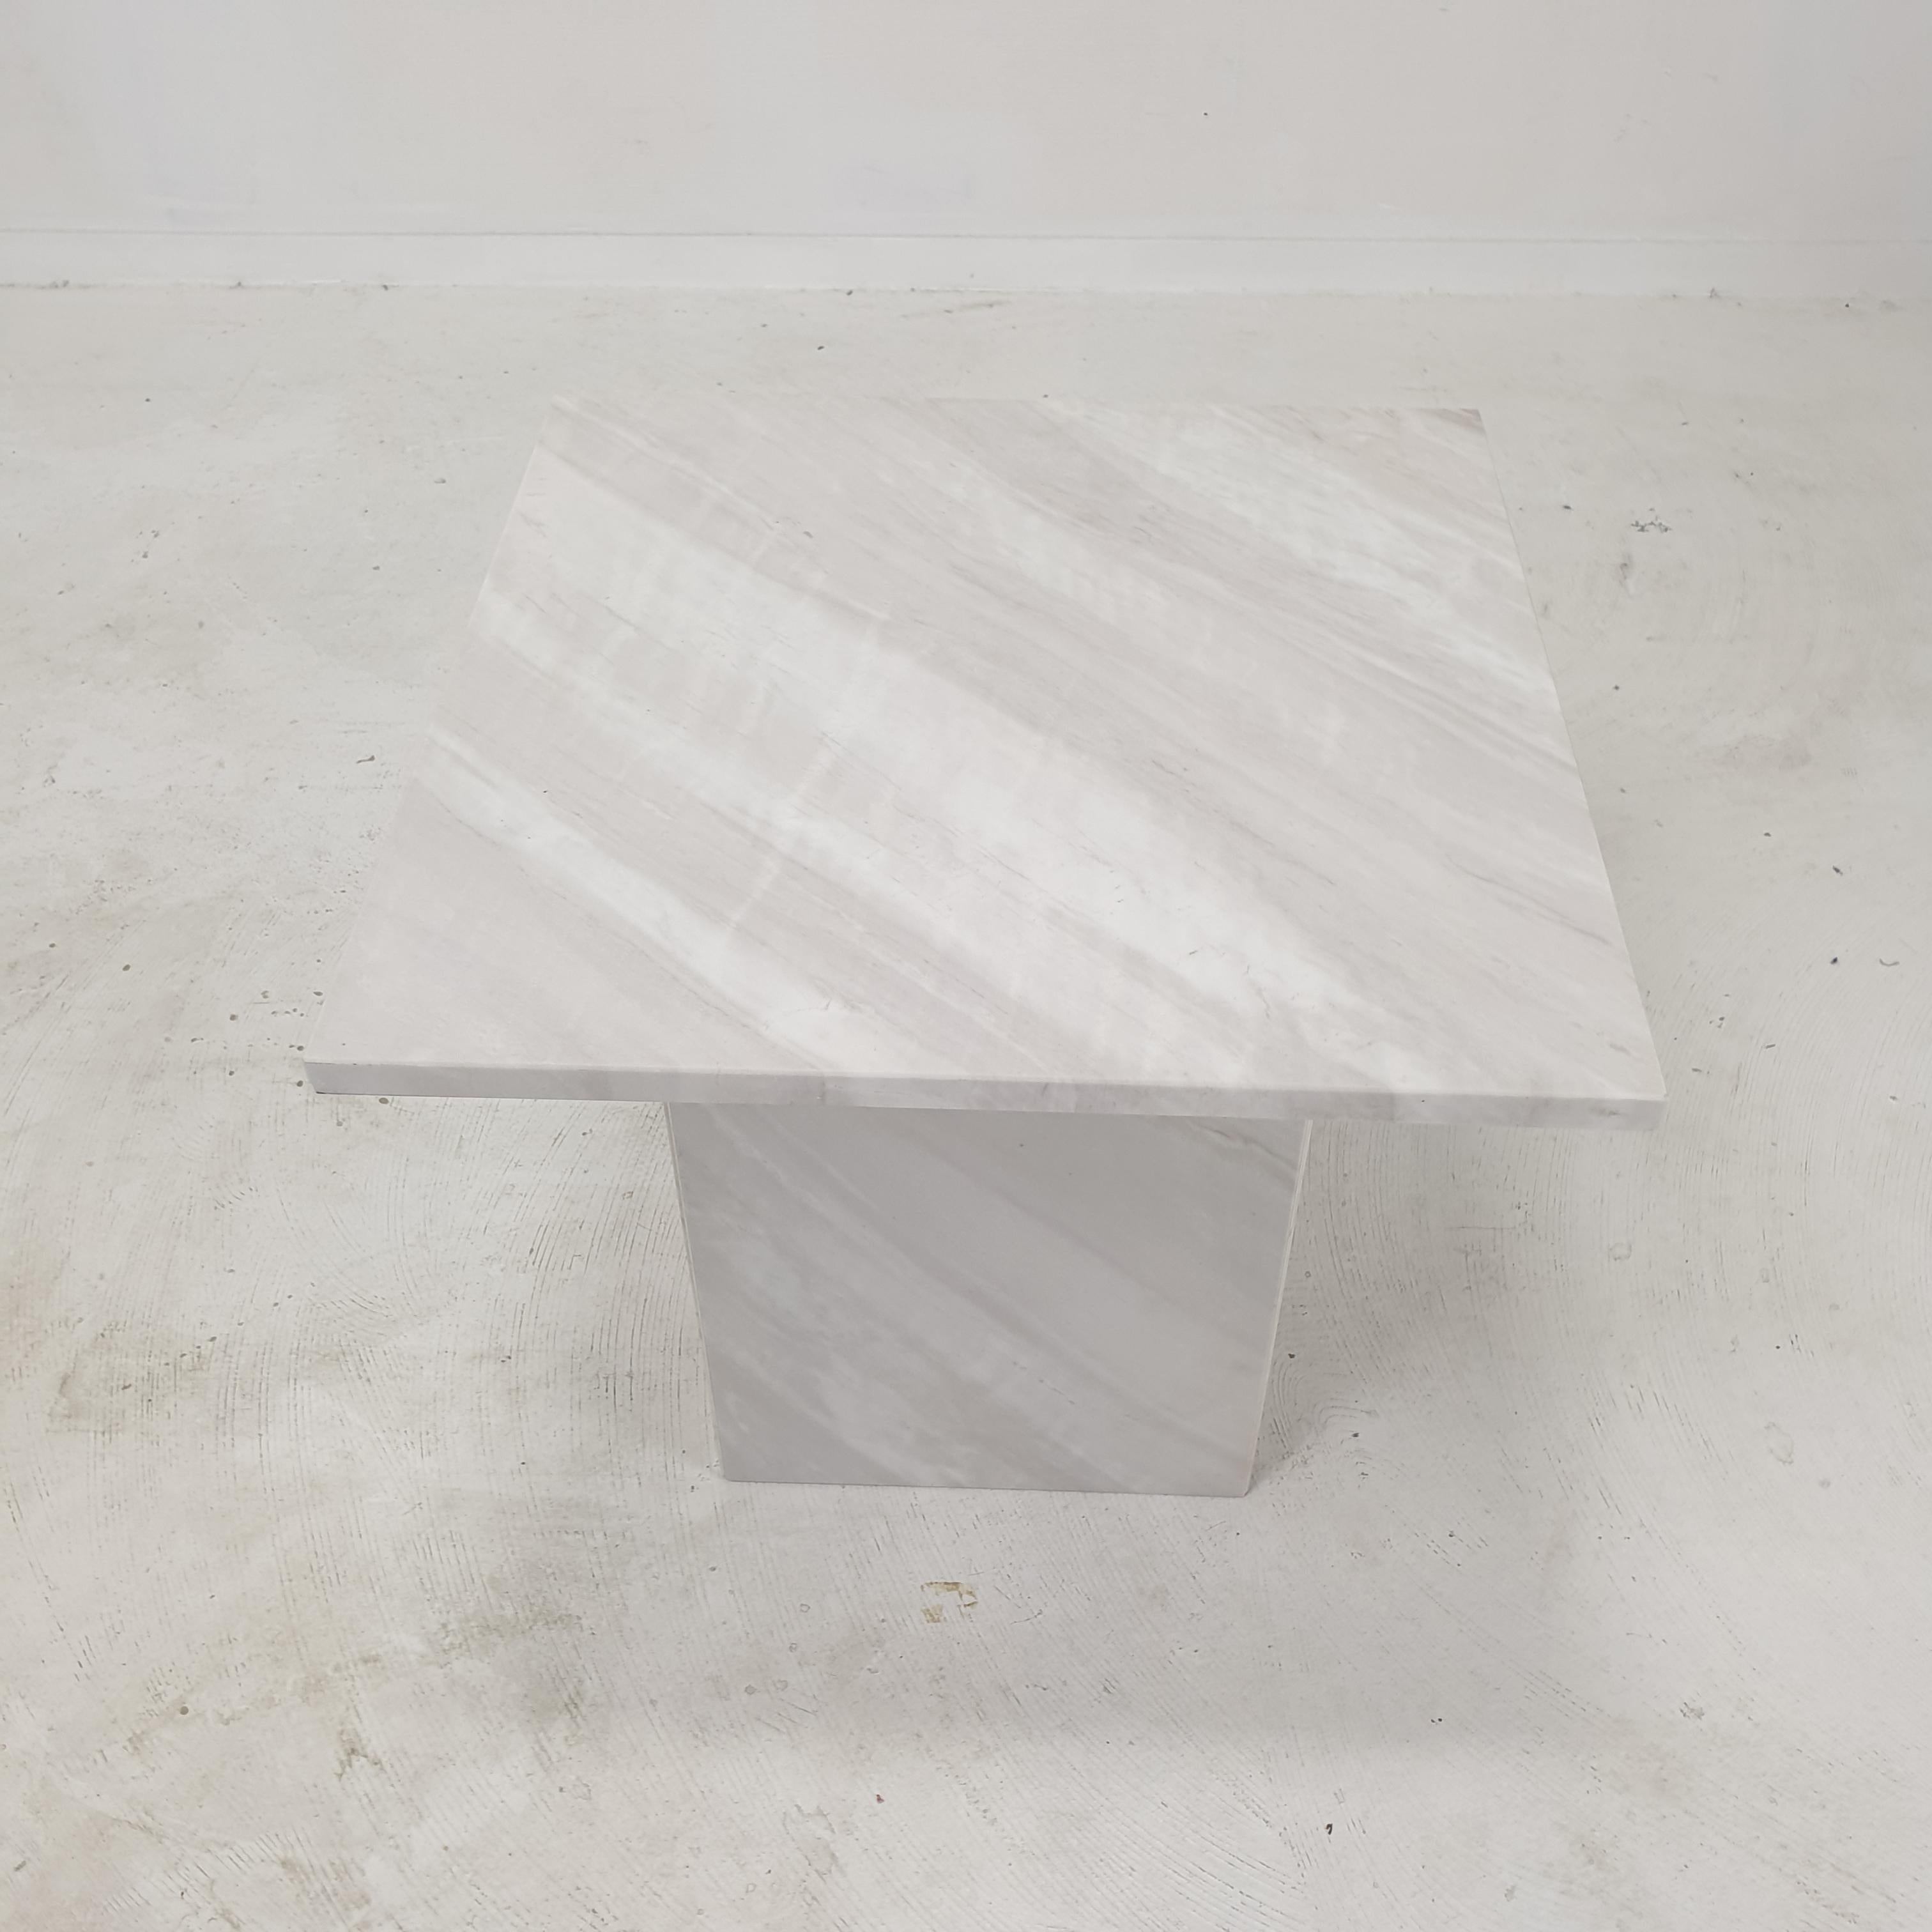 Late 20th Century Italian Marble Coffee or Side Table, 1980s For Sale